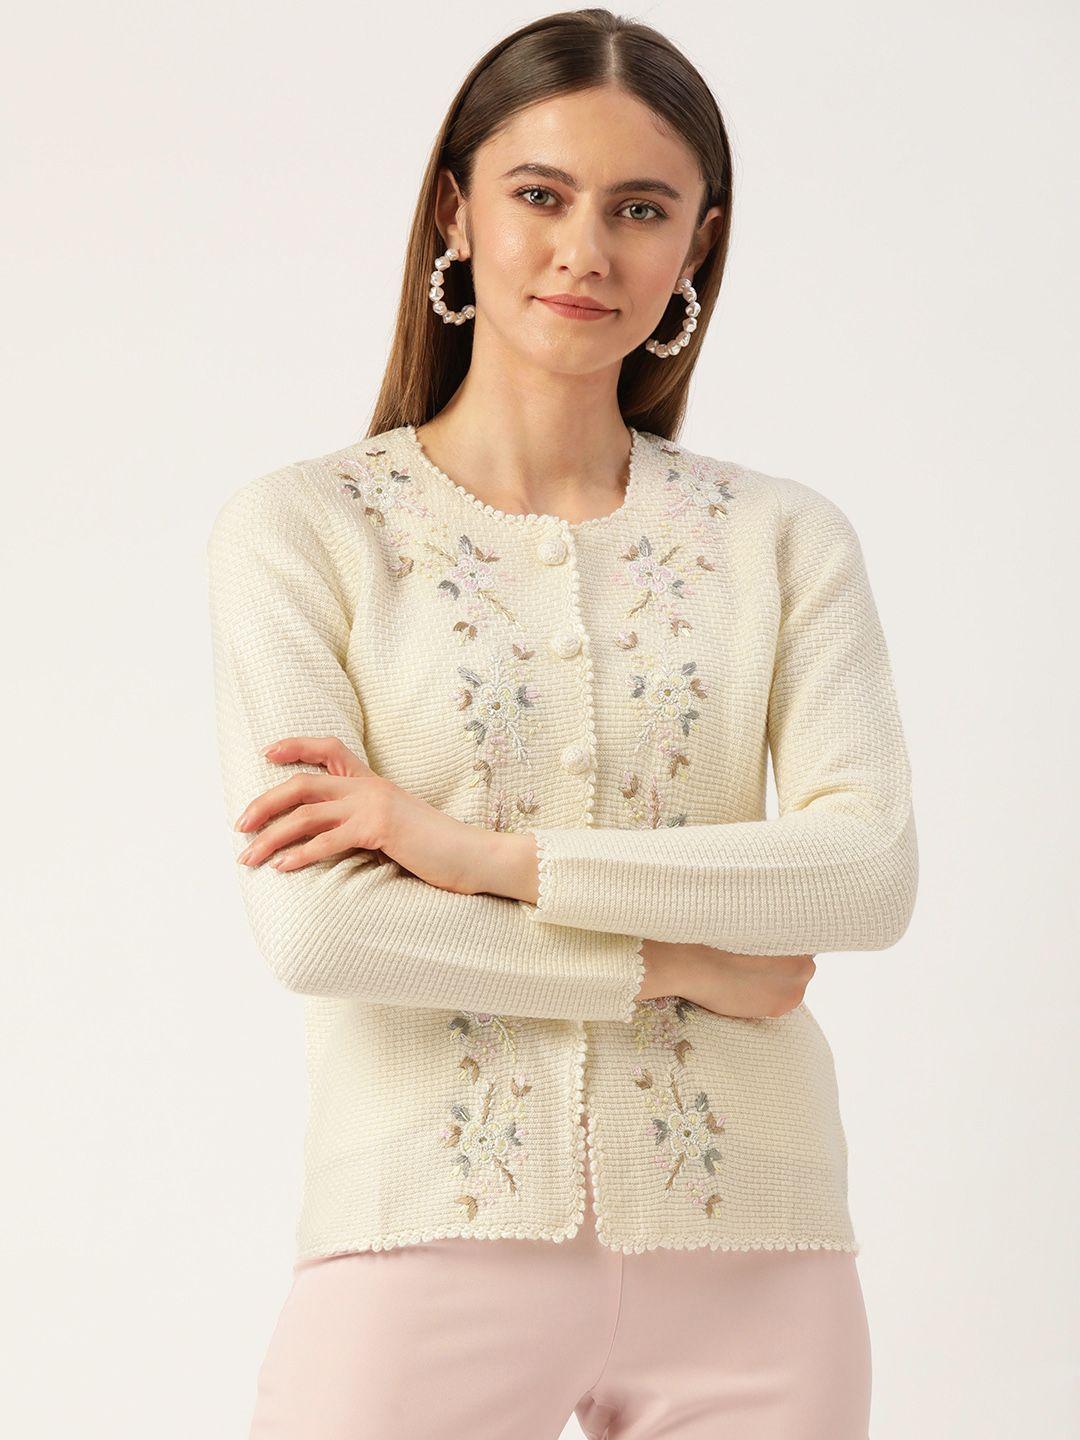 apsley women off white floral cardigan with embellished detail